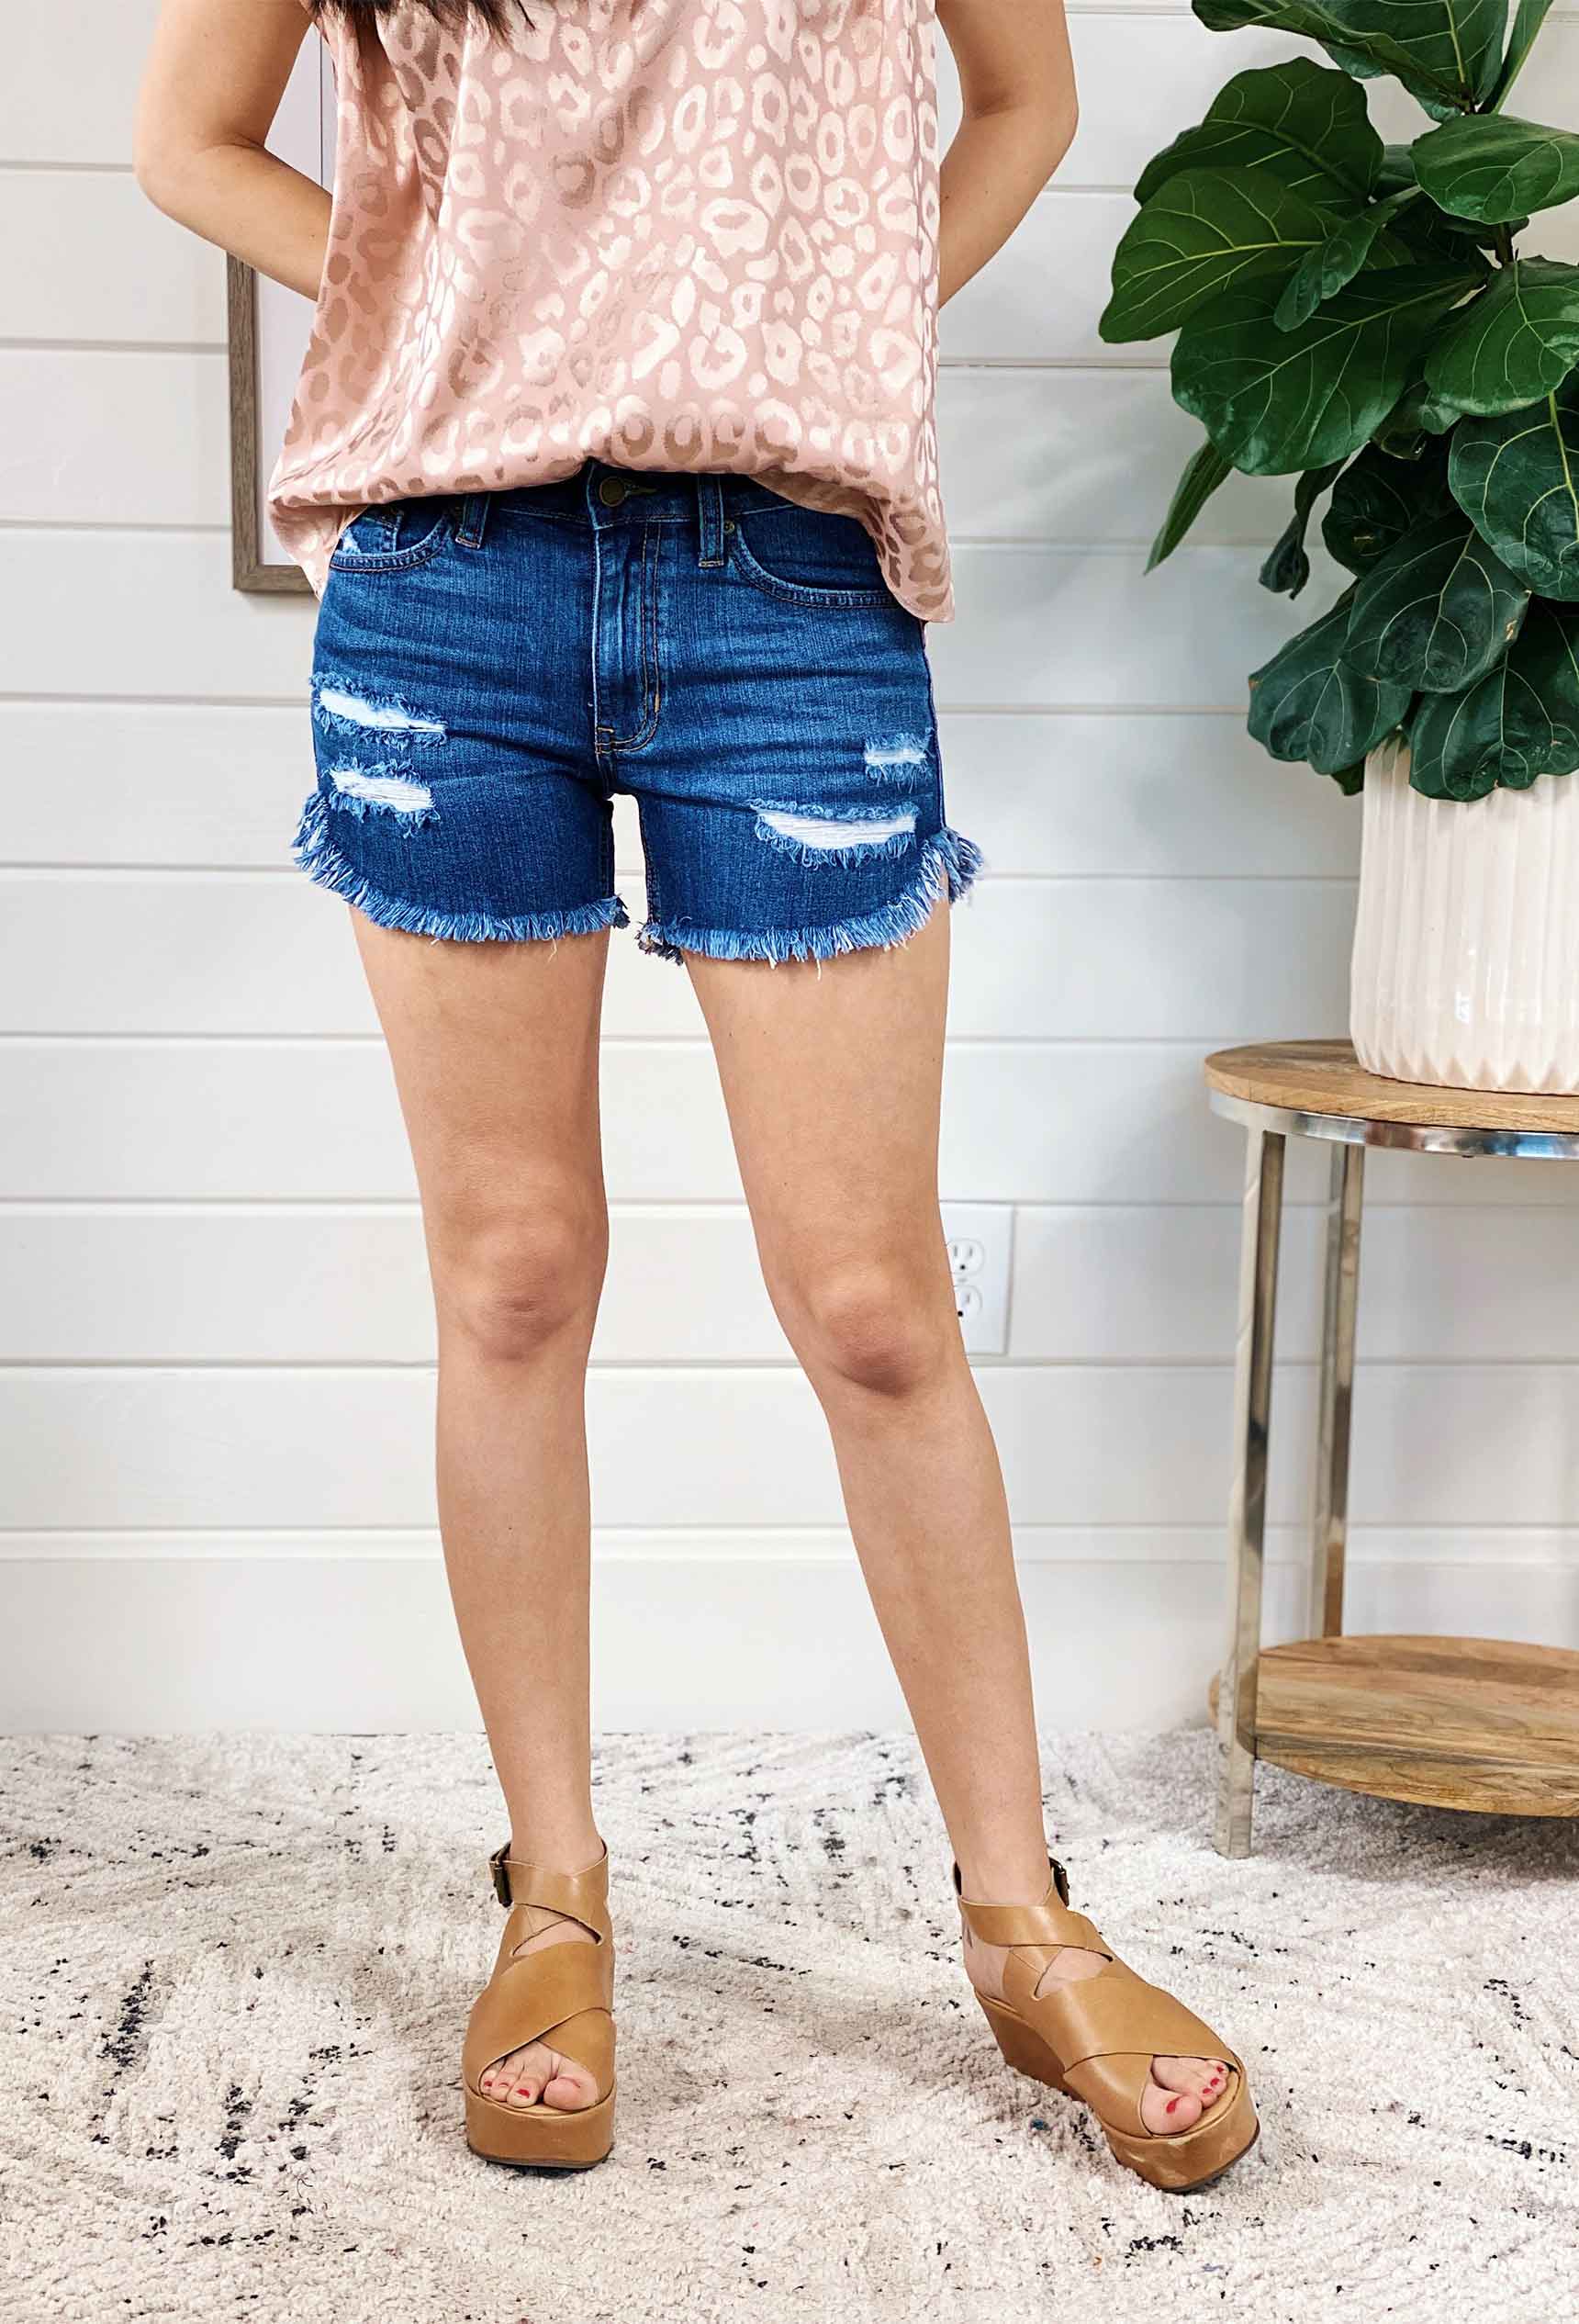 18 Outfits With Distressed Denim Shorts For Ladies - Styleoholic